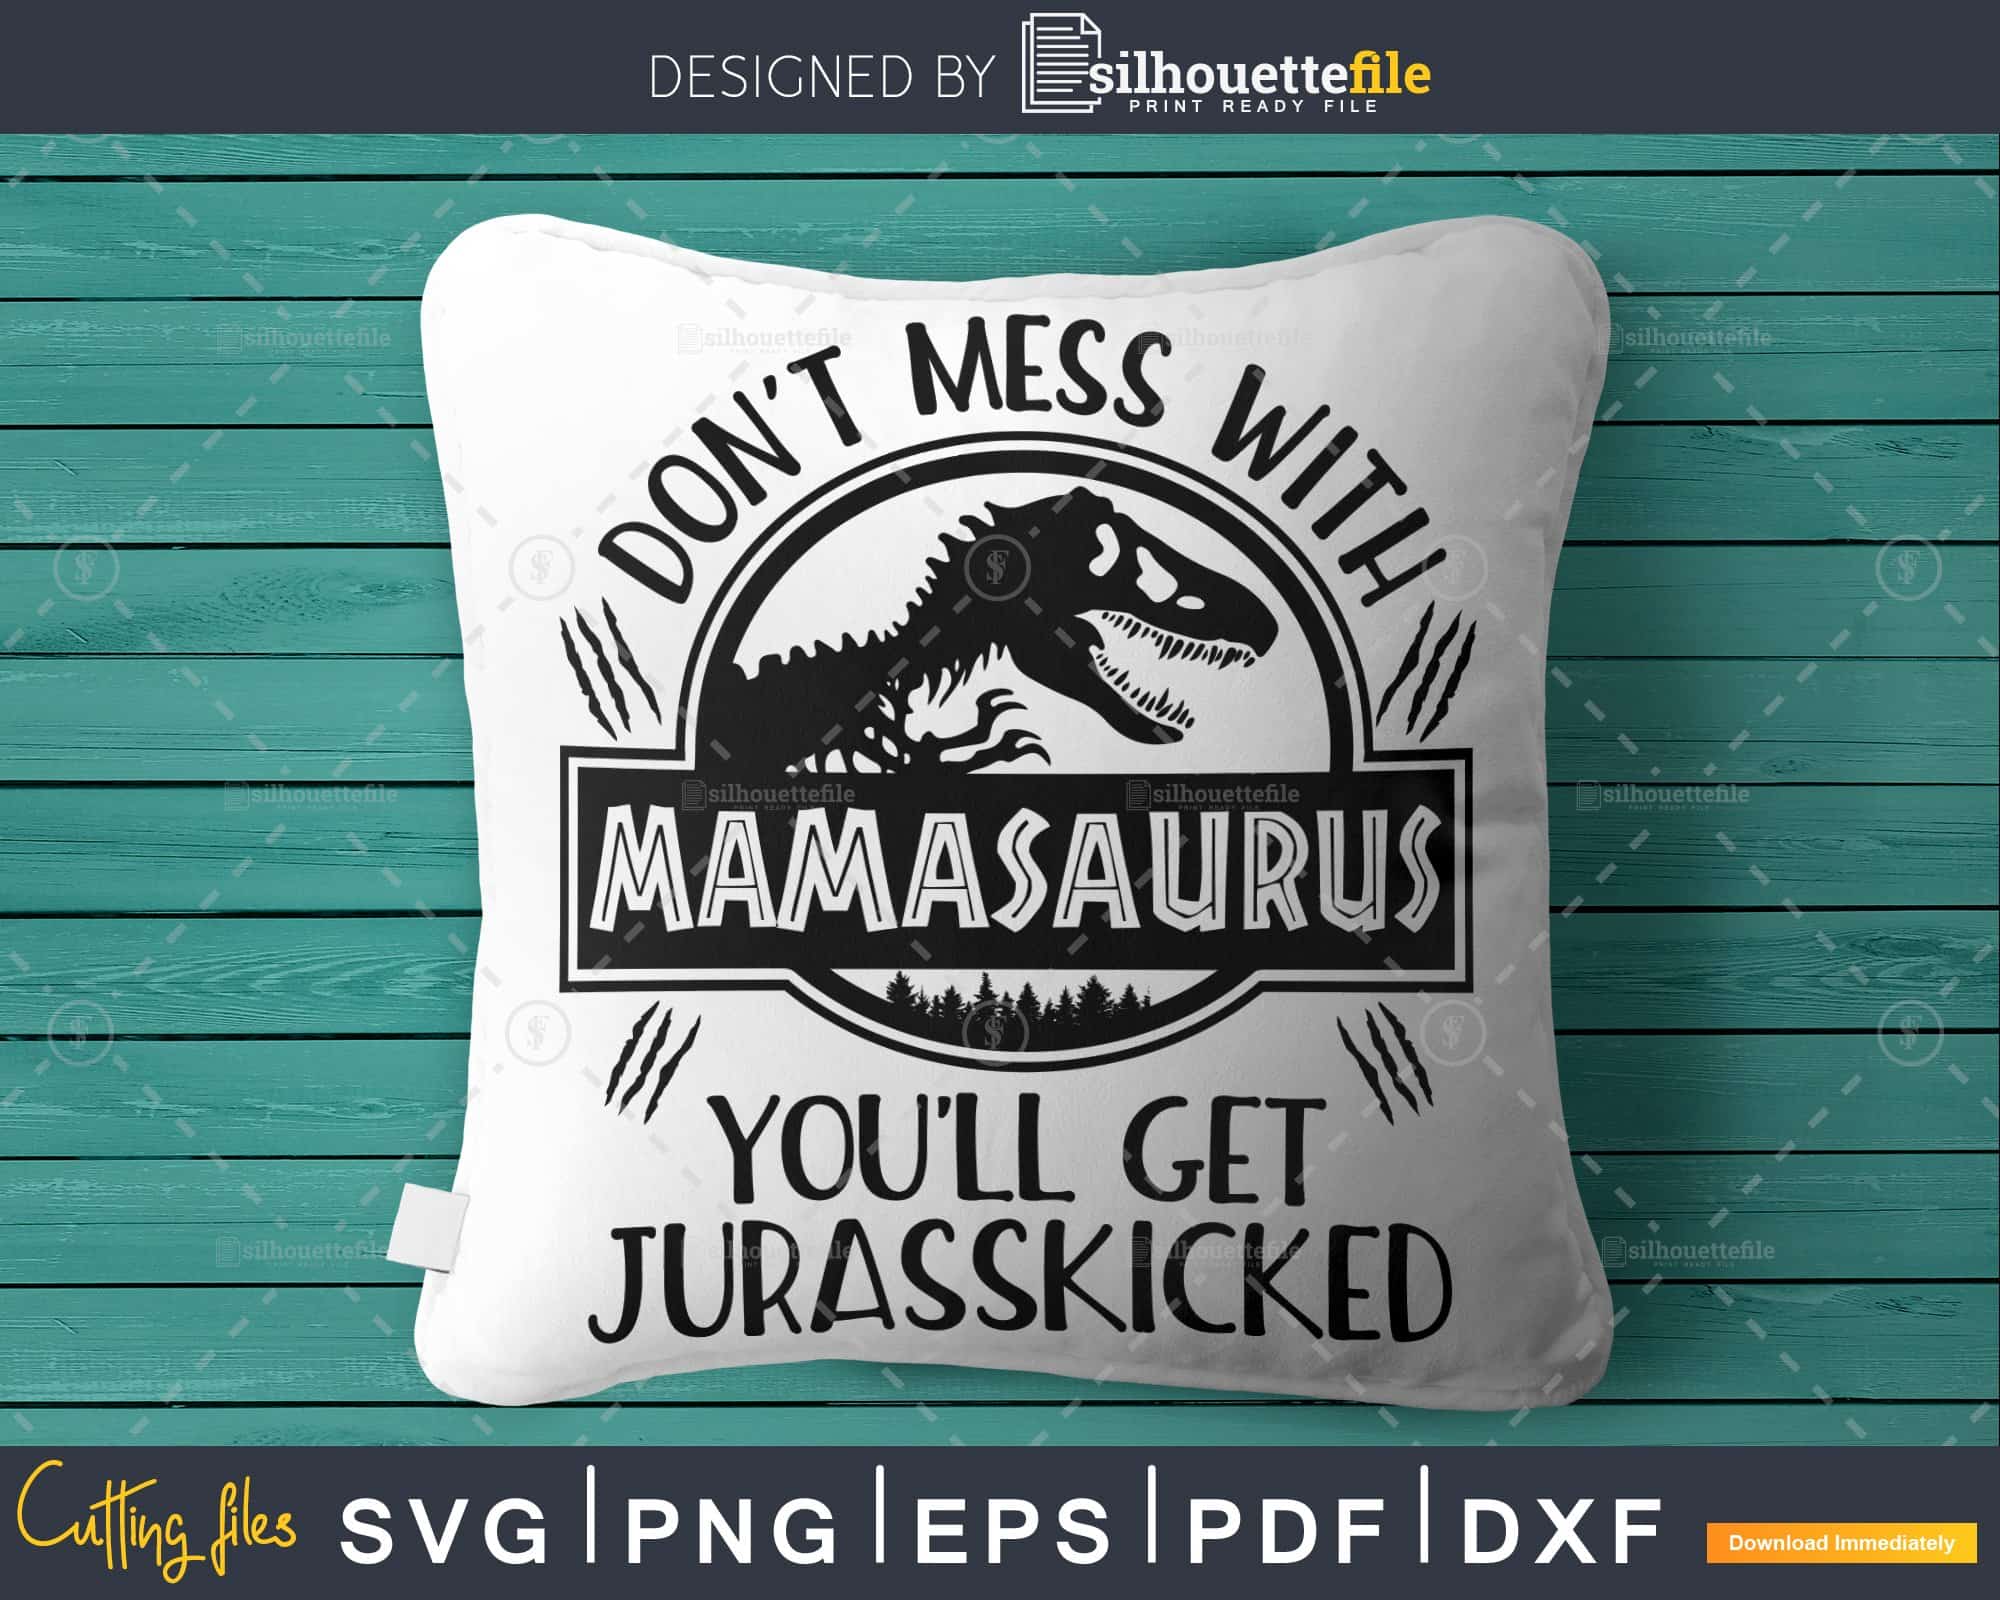 Download Mamasaurus Jurasskicked Dinosaur Party Svg Cut Files For Cutting Silhouettefile